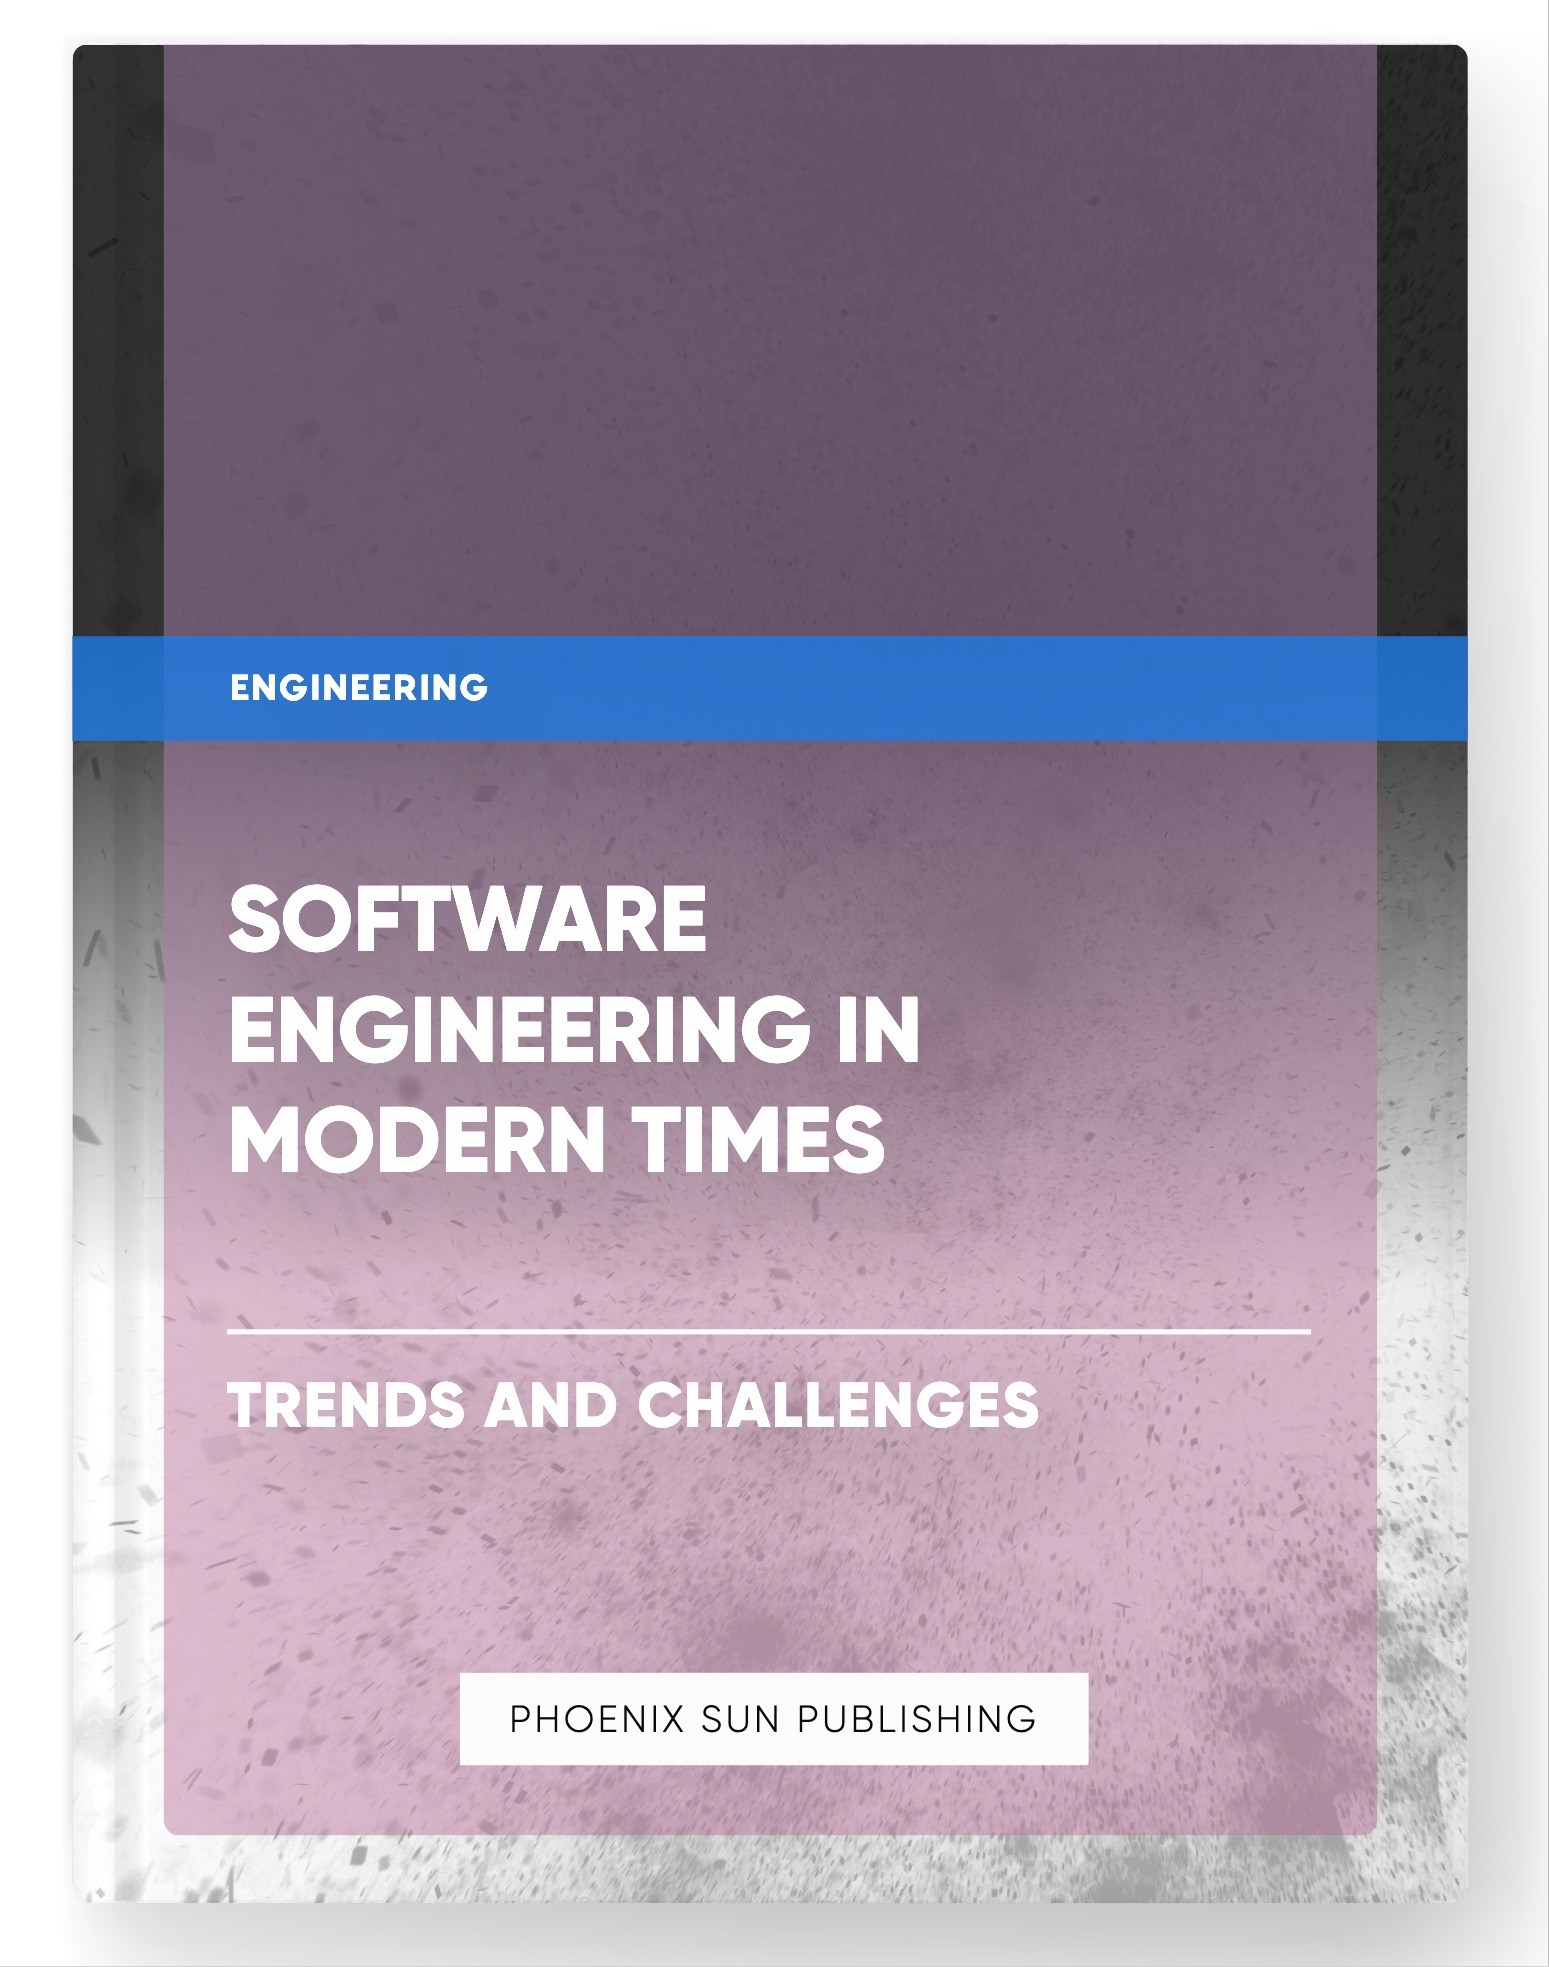 Software Engineering in Modern Times – Trends and Challenges